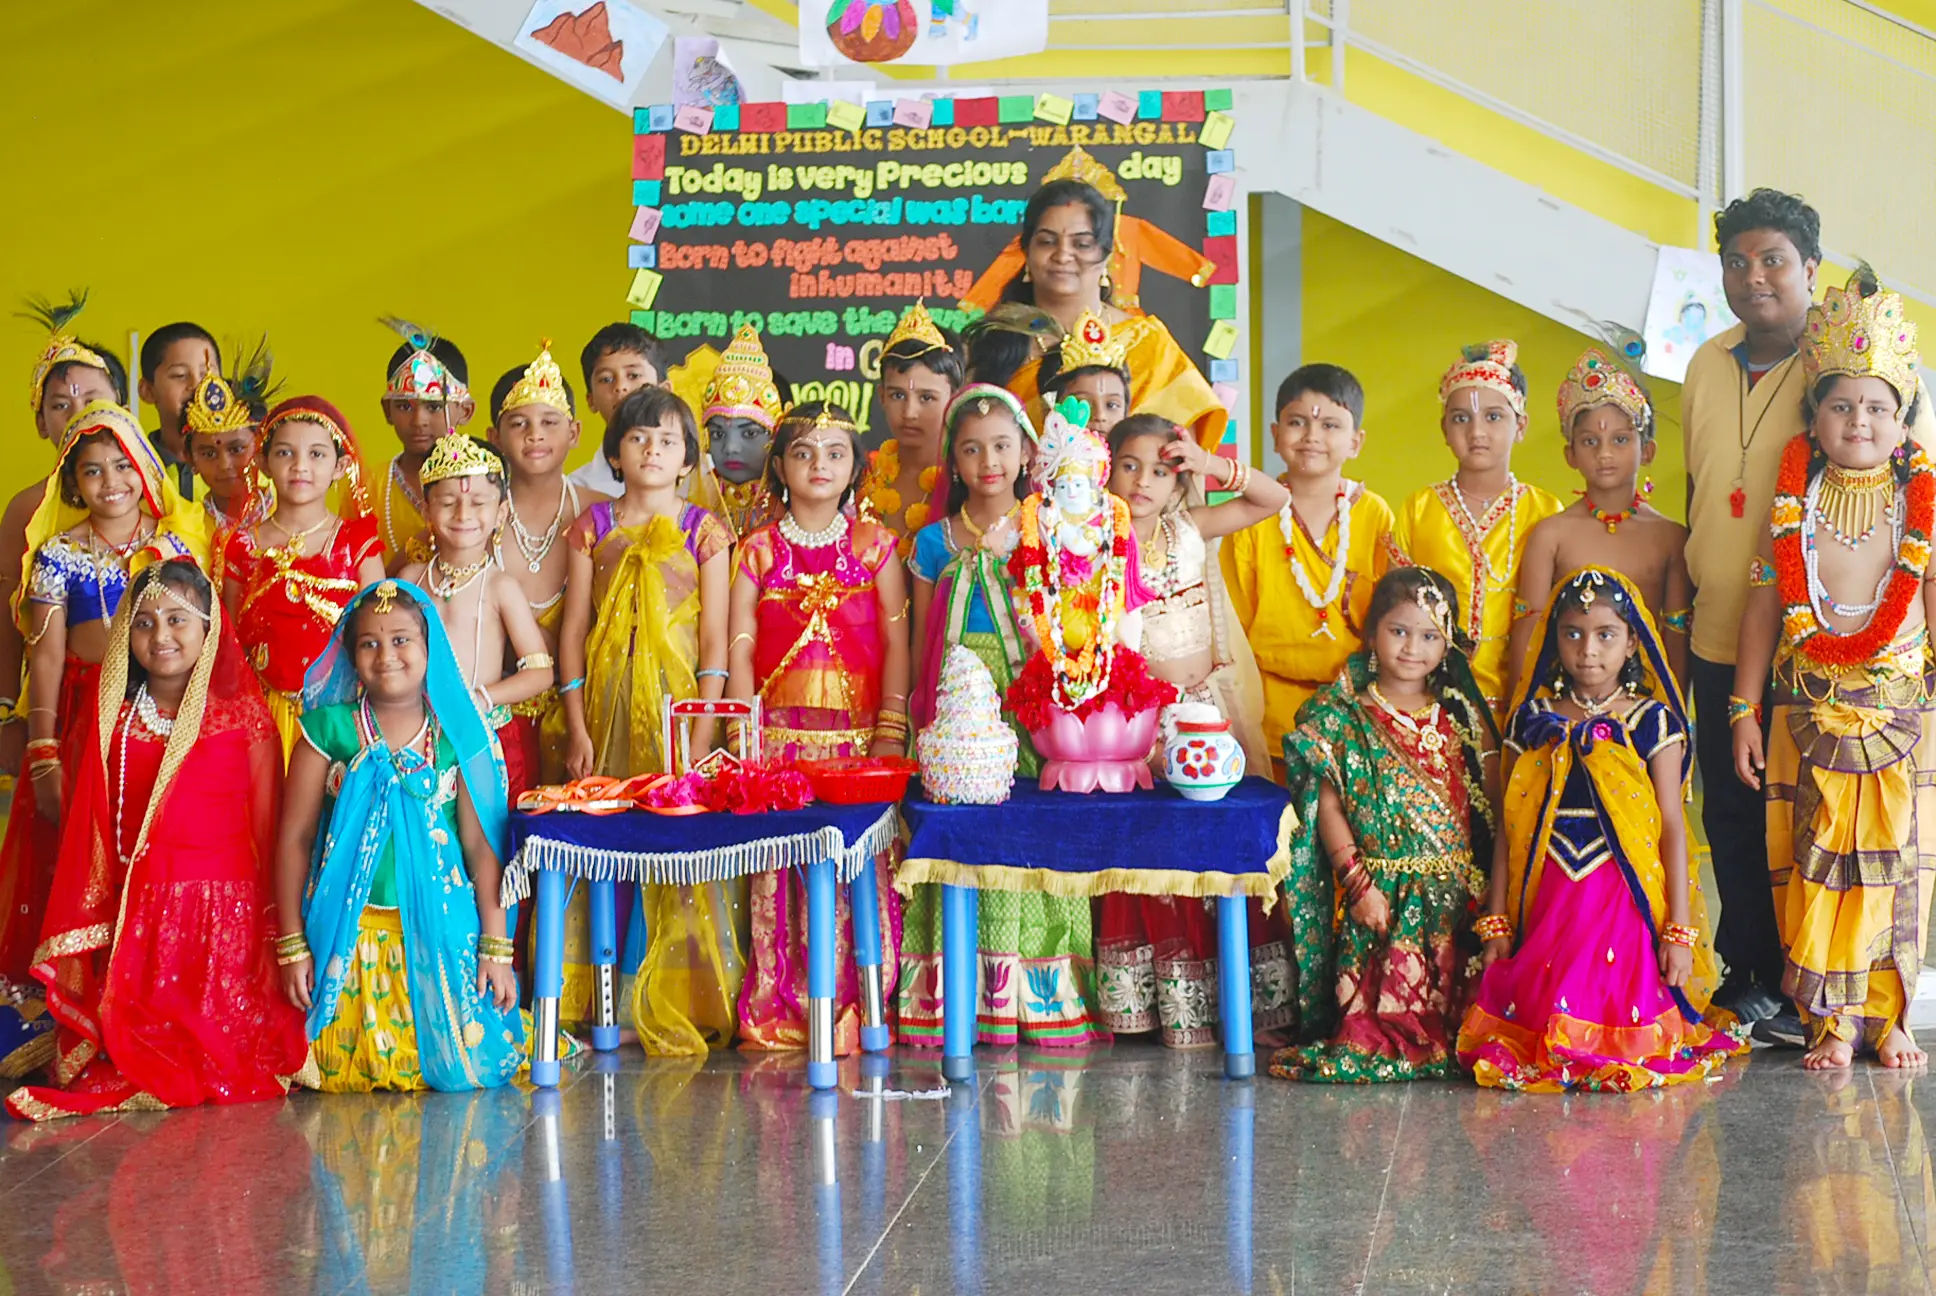 Students at DPS, Warangal actively engaged in the celebration of festivals such as Janmashtami